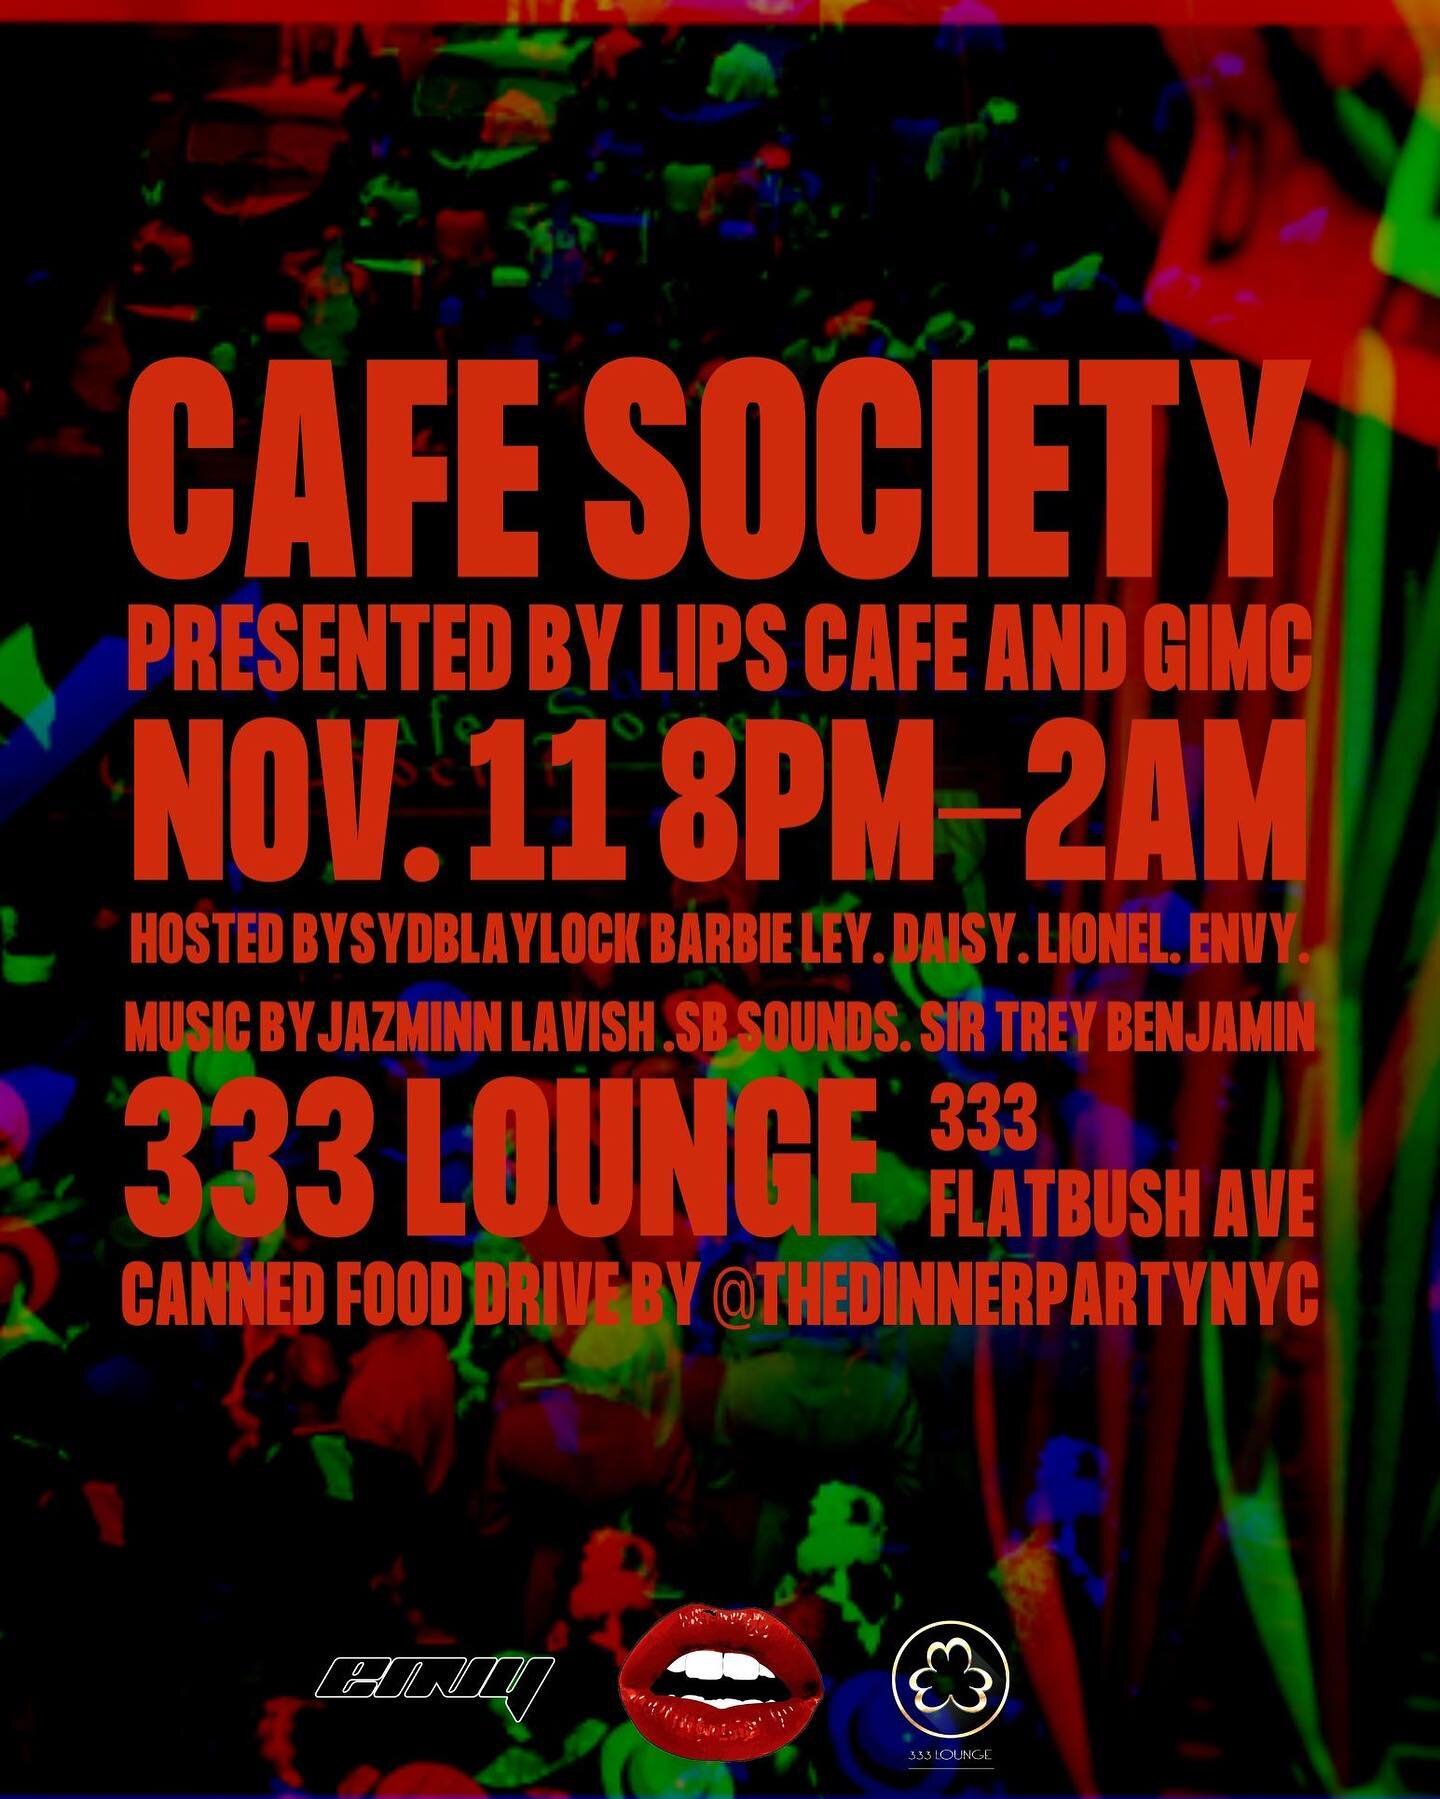 Cafe Society is back this month to party with a purpose!
Meet us this Friday at @333.lounge for a line up of great music, hosts and drinks. The event also doubles as a canned food drive by way of @thedinnerpartynyc! It&rsquo;s giving season some come